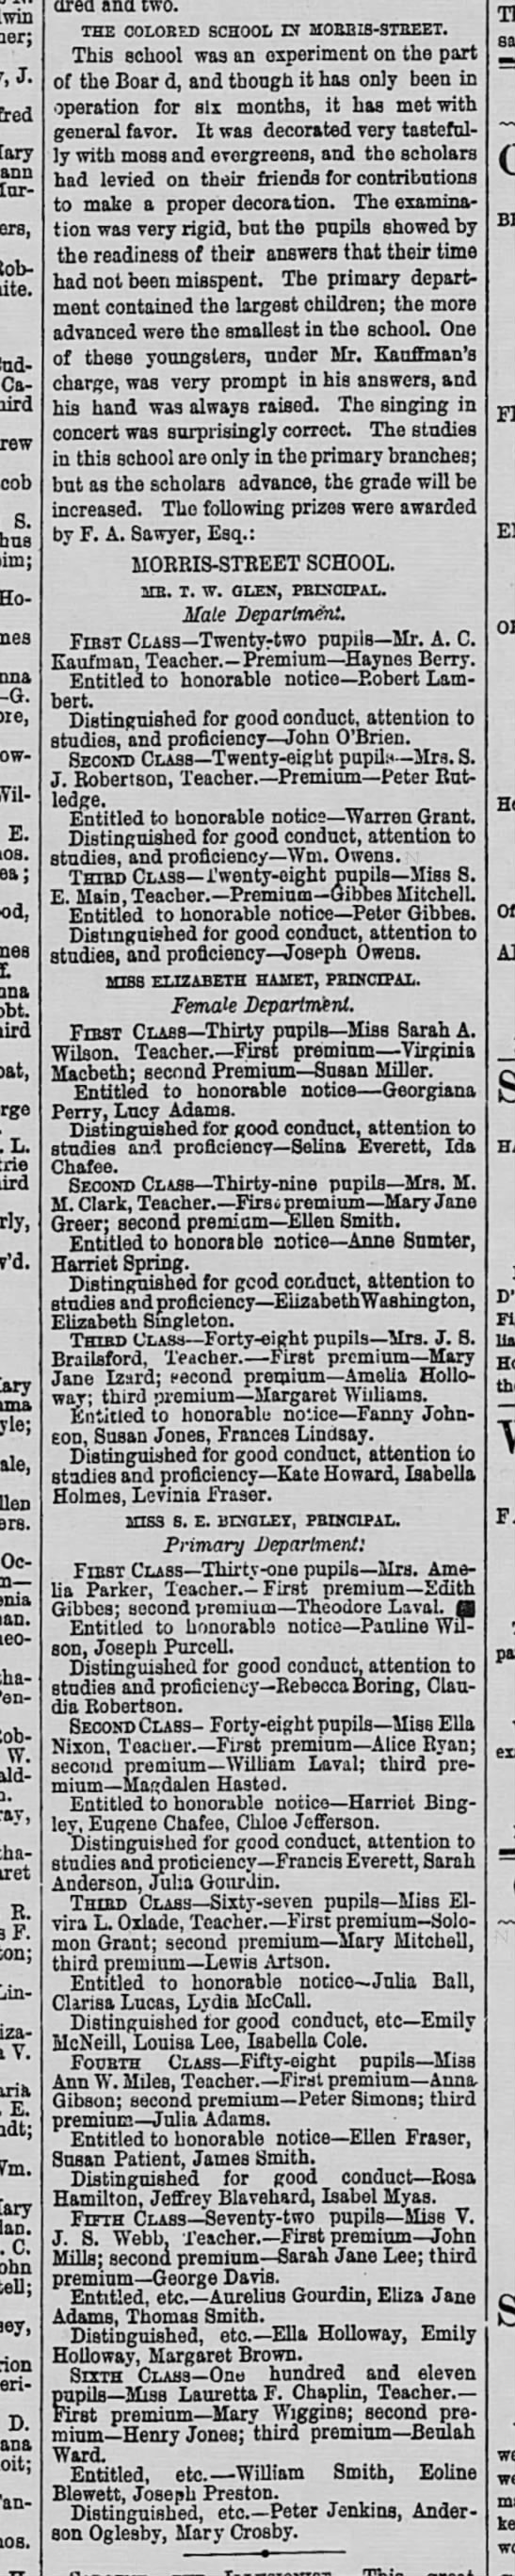 The Colored School at Morris Street, Charleston Daily News, 2 April 1868 - 